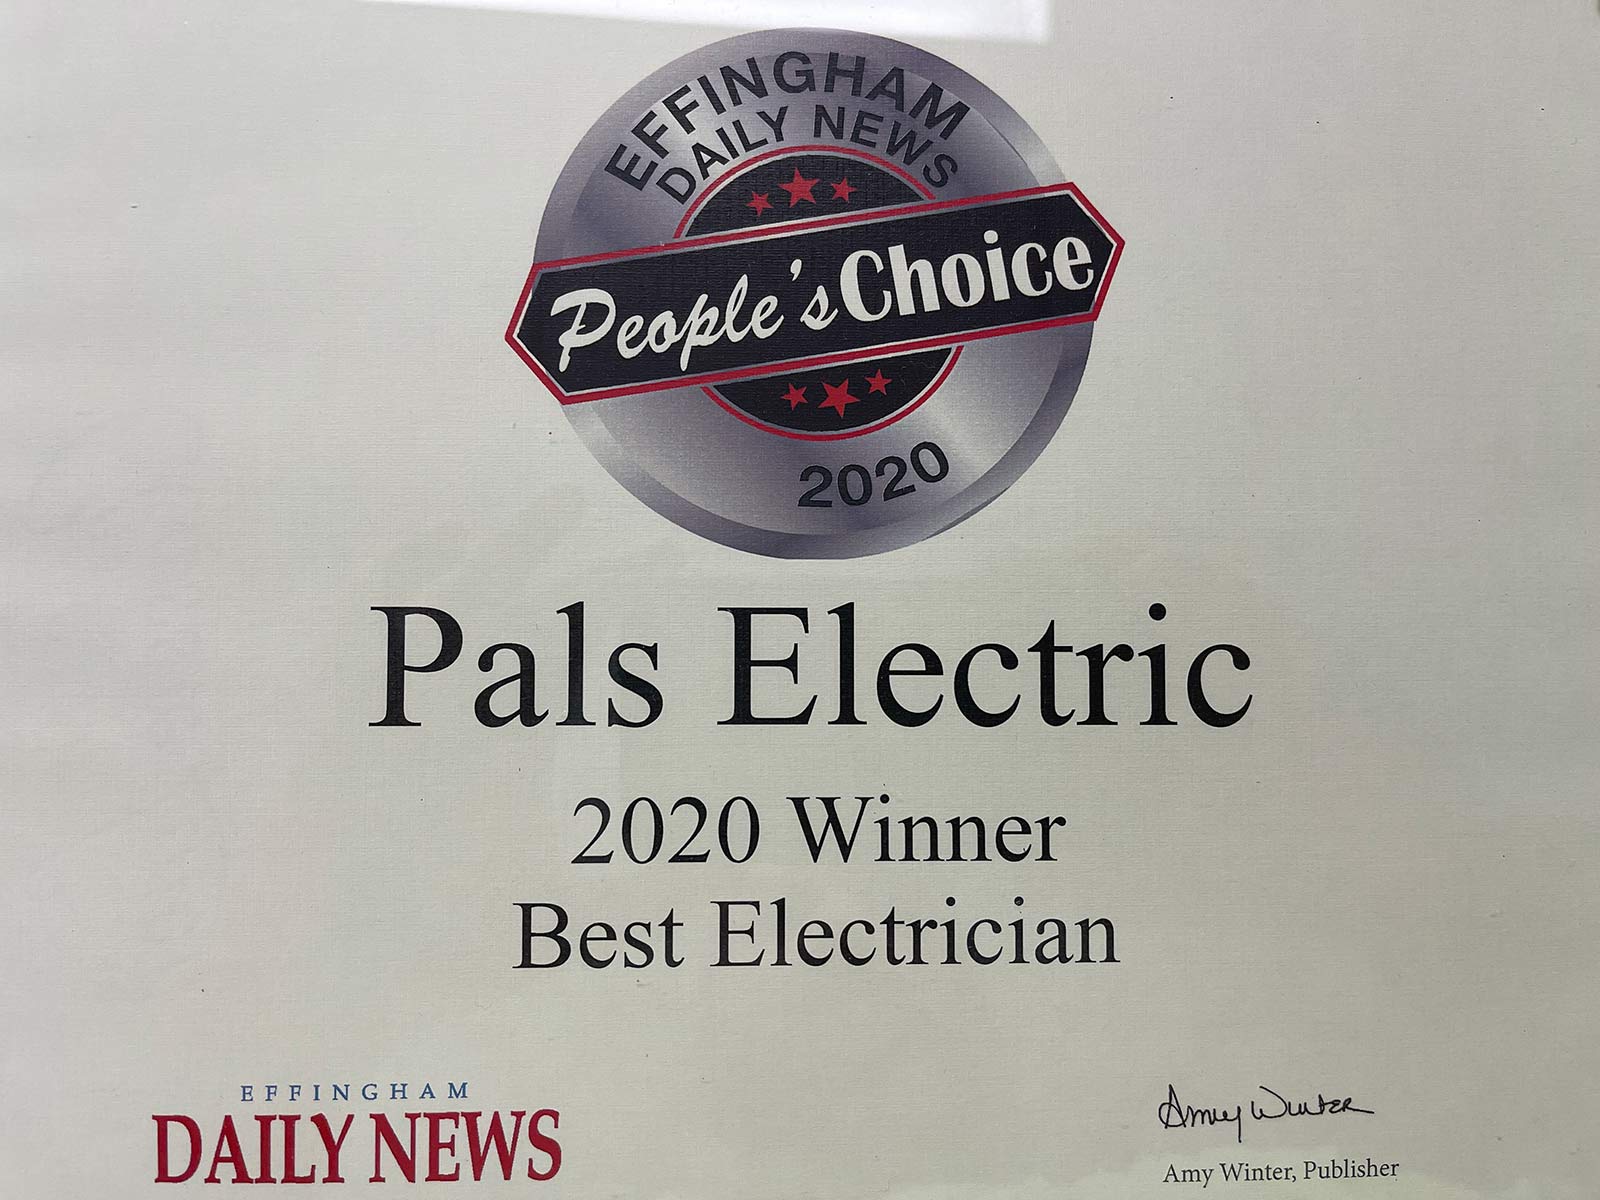 Effingham Daily News People's Choice 2020: Pals Electric for Best Electrician